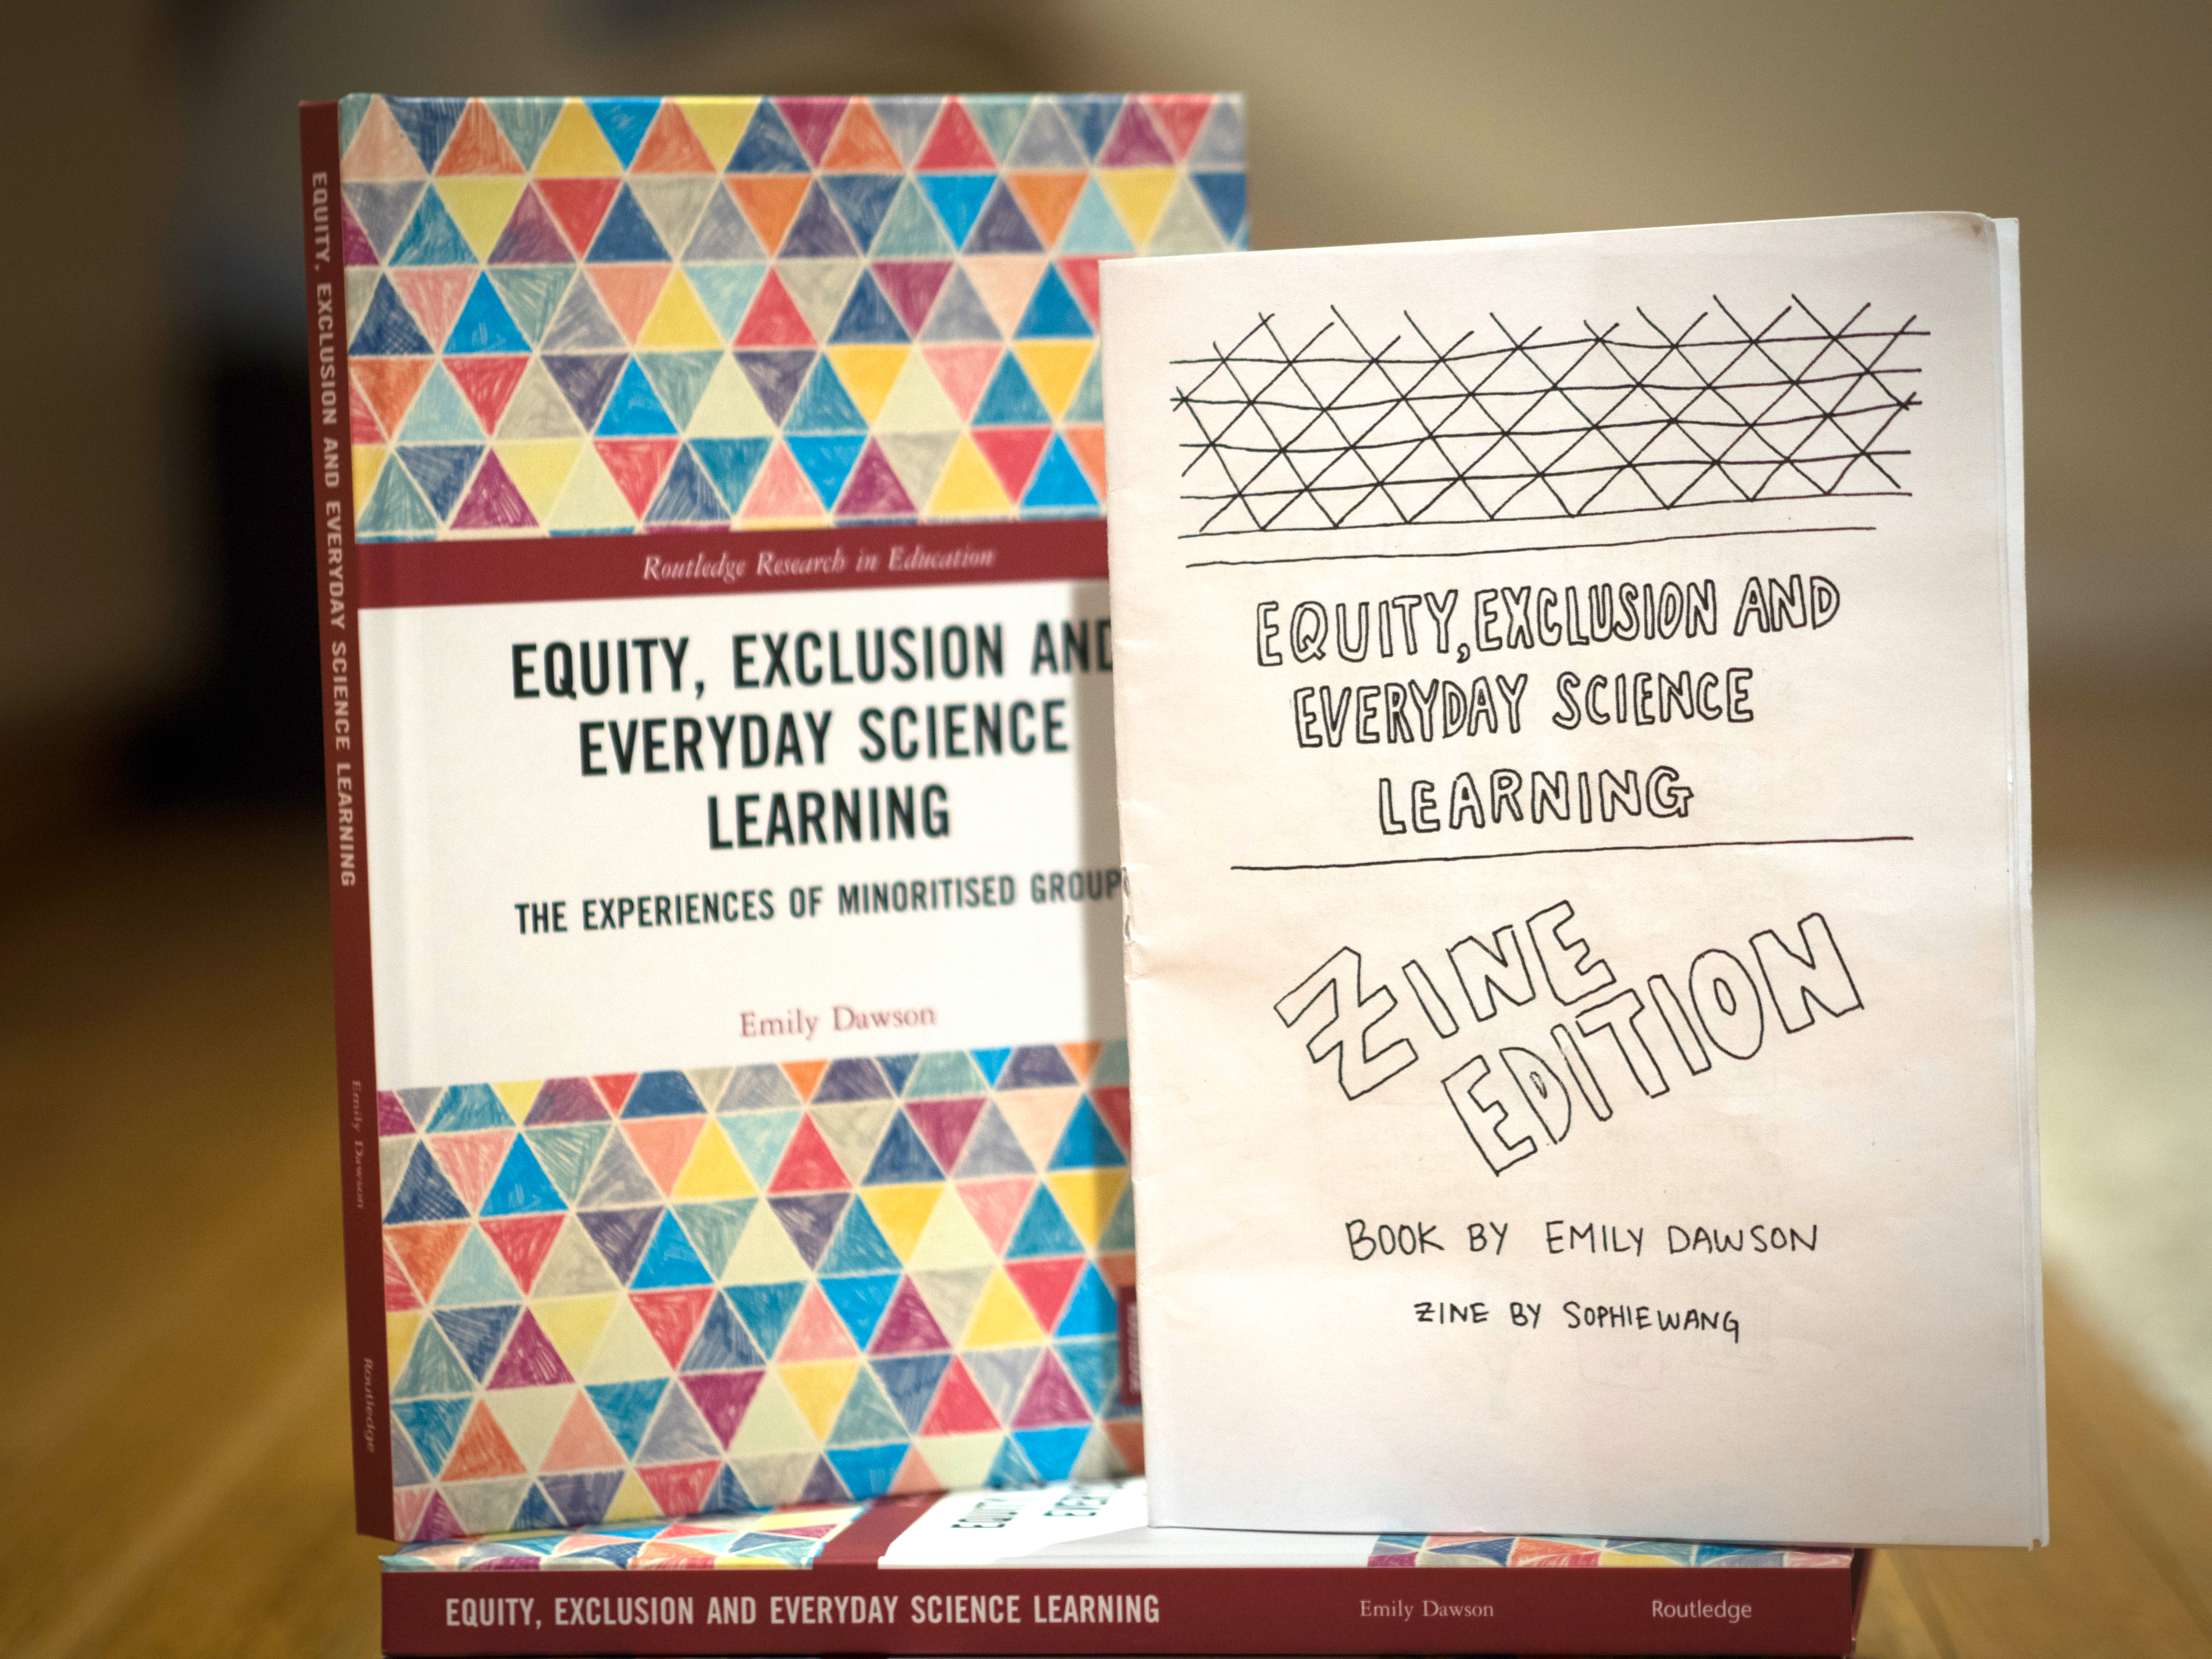 photograph of the front cover of a book on the left with the title equity, exclusion and everyday science learning, next to the front cover of a zine on the right, with the same title